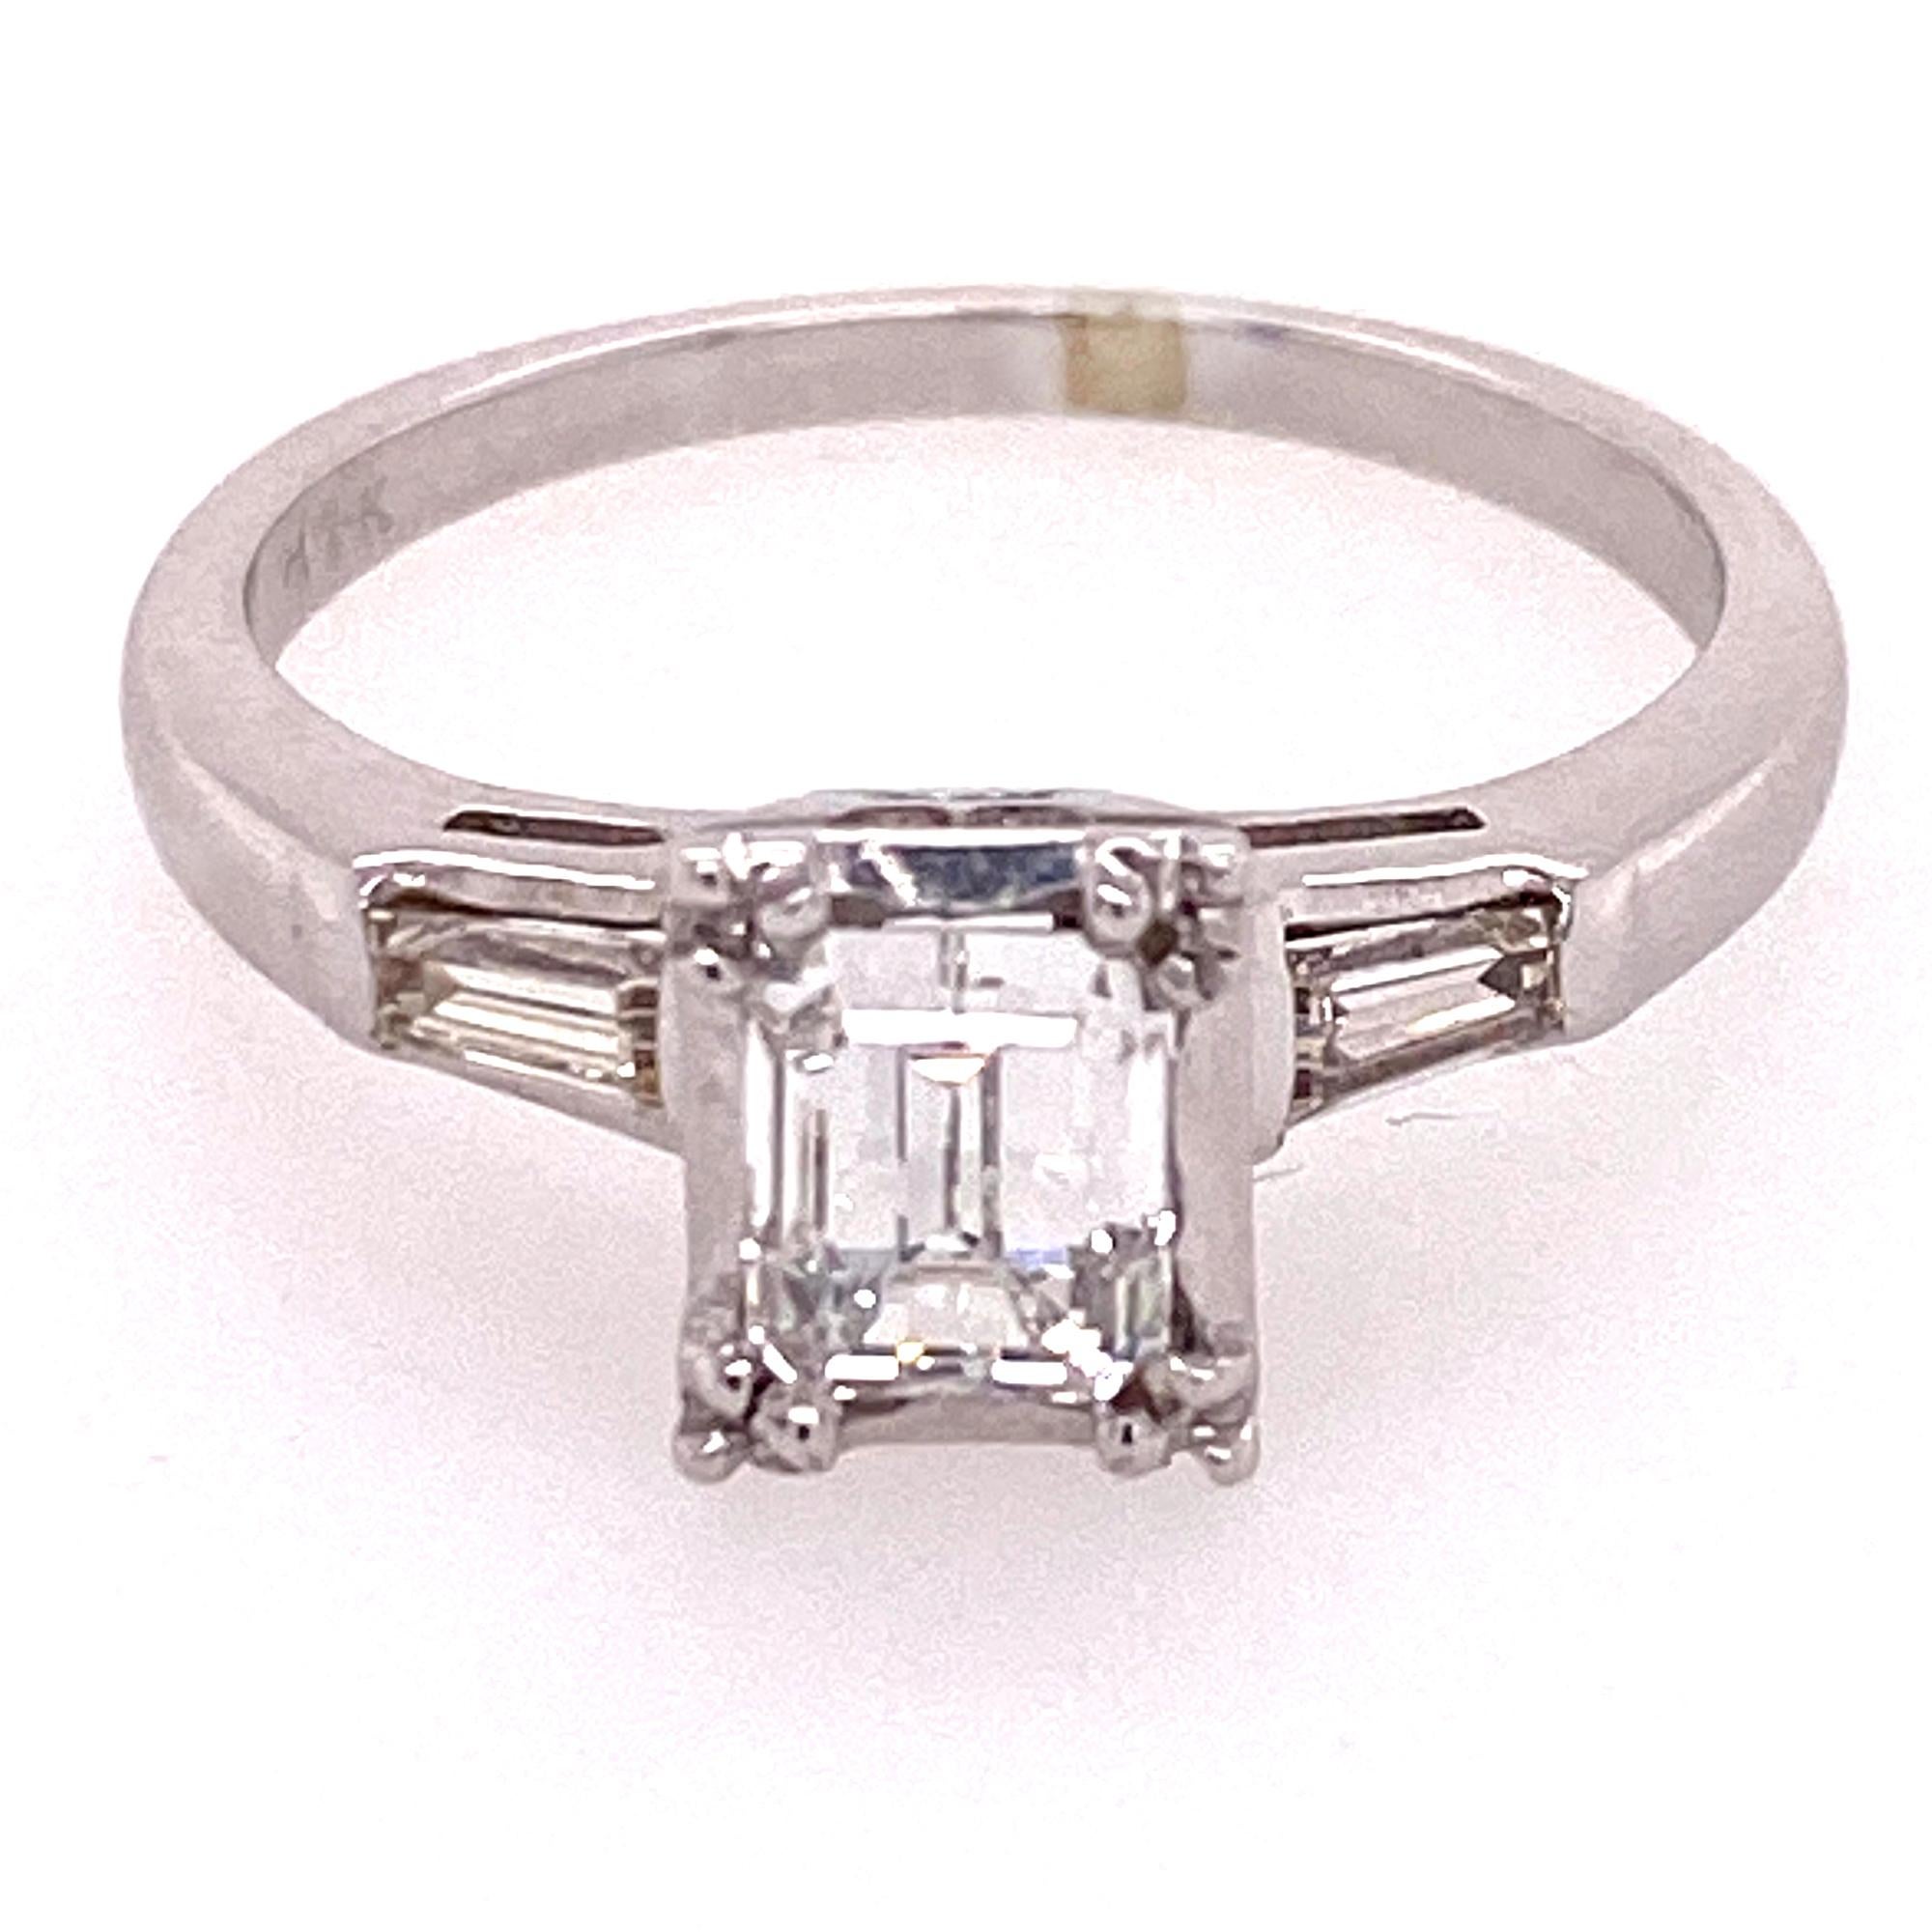 Beautiful emerald cut diamond engagement ring fashioned in 14 karat white gold. The emerald cut diamond weighs .77 carats and is graded by the GIA G color and VVS2 clarity. The emerald cut is flanked by two tapered baguettes weighing .04 ctw. The